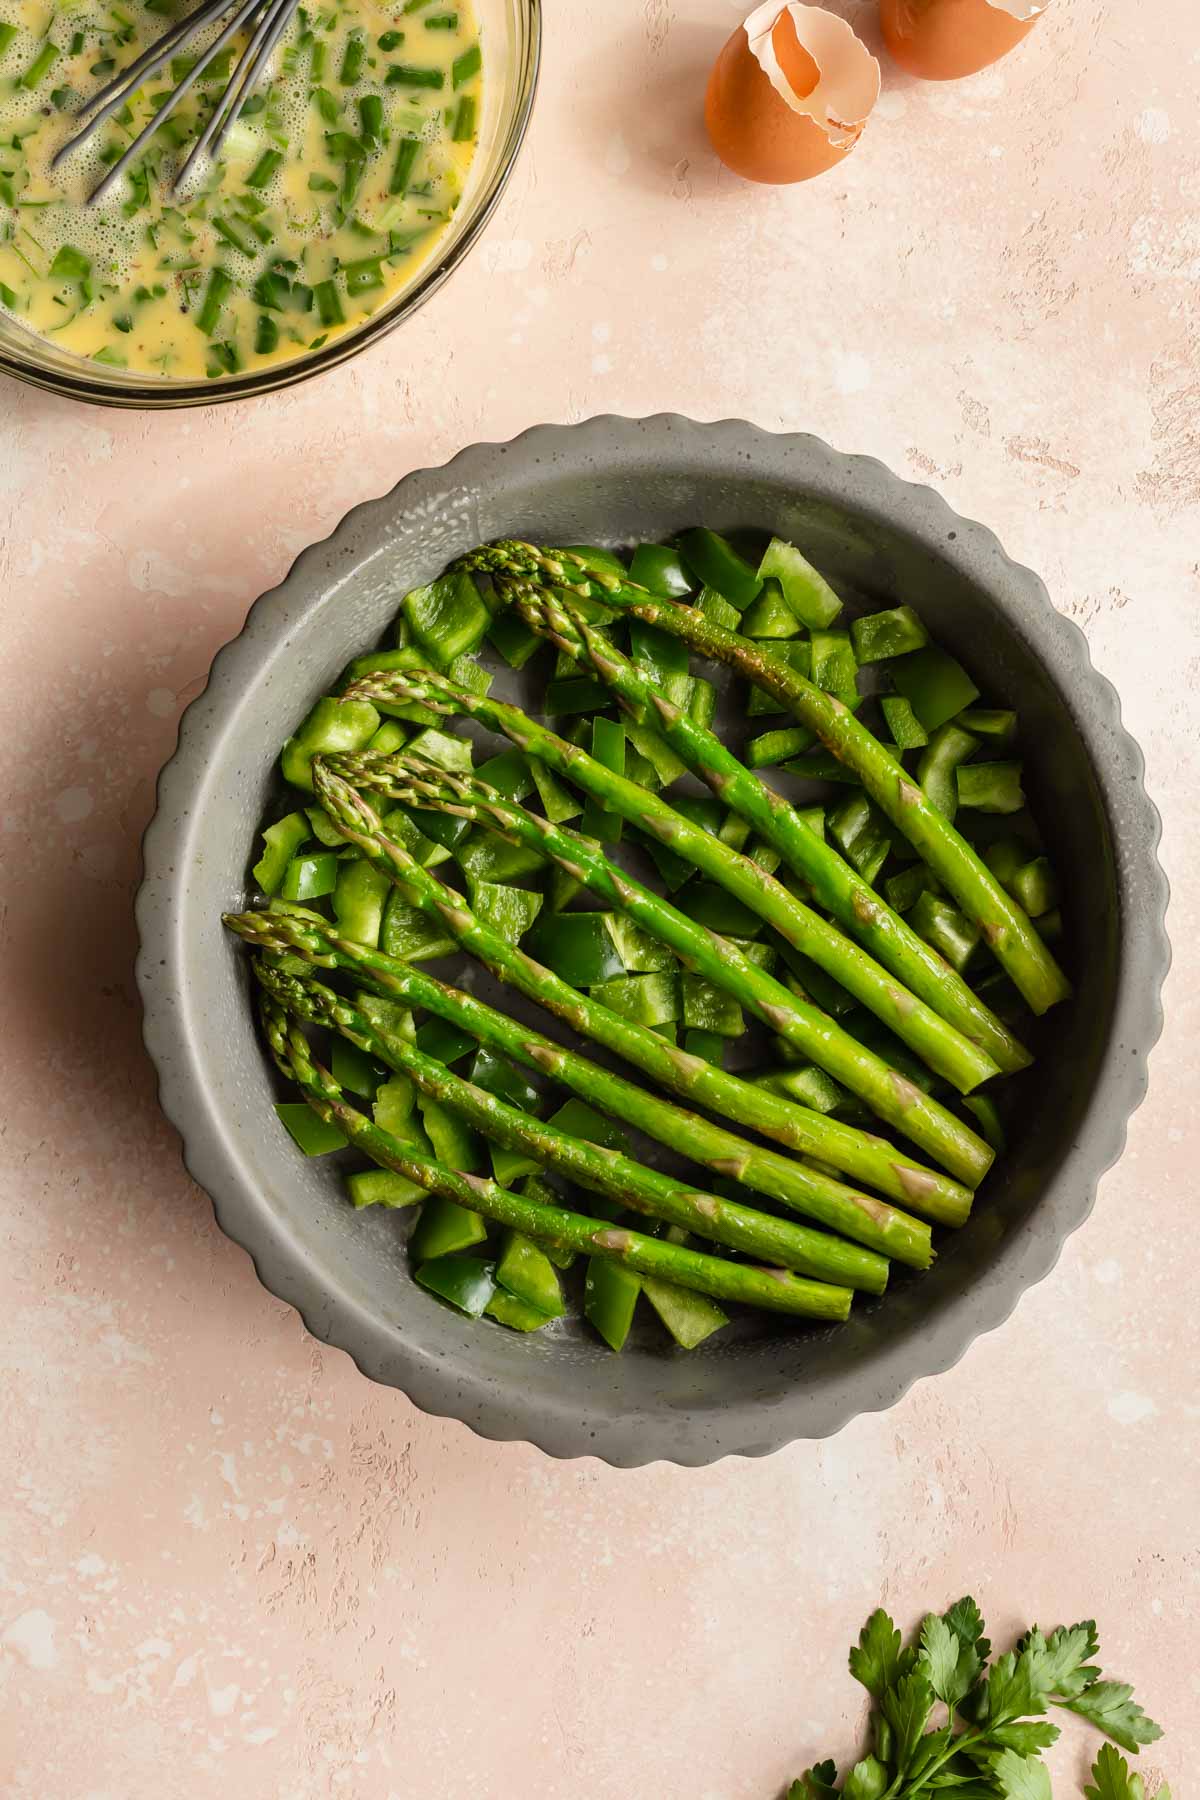 Green pepper and asparagus spears arranged in a pie plate.